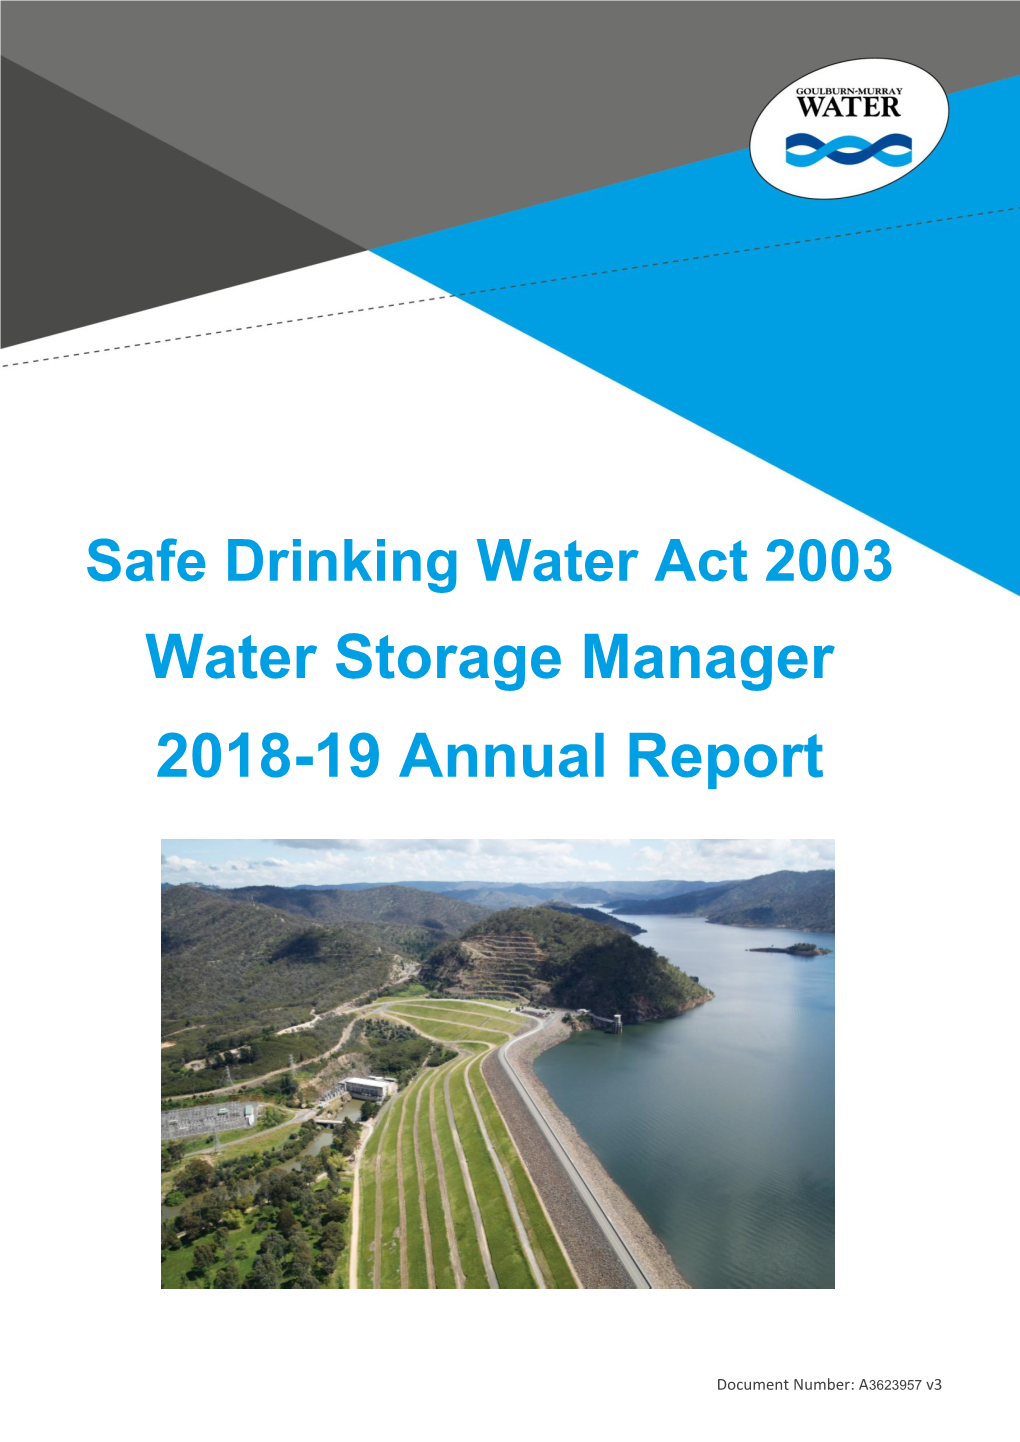 Water Storage Manager 2018-19 Annual Report